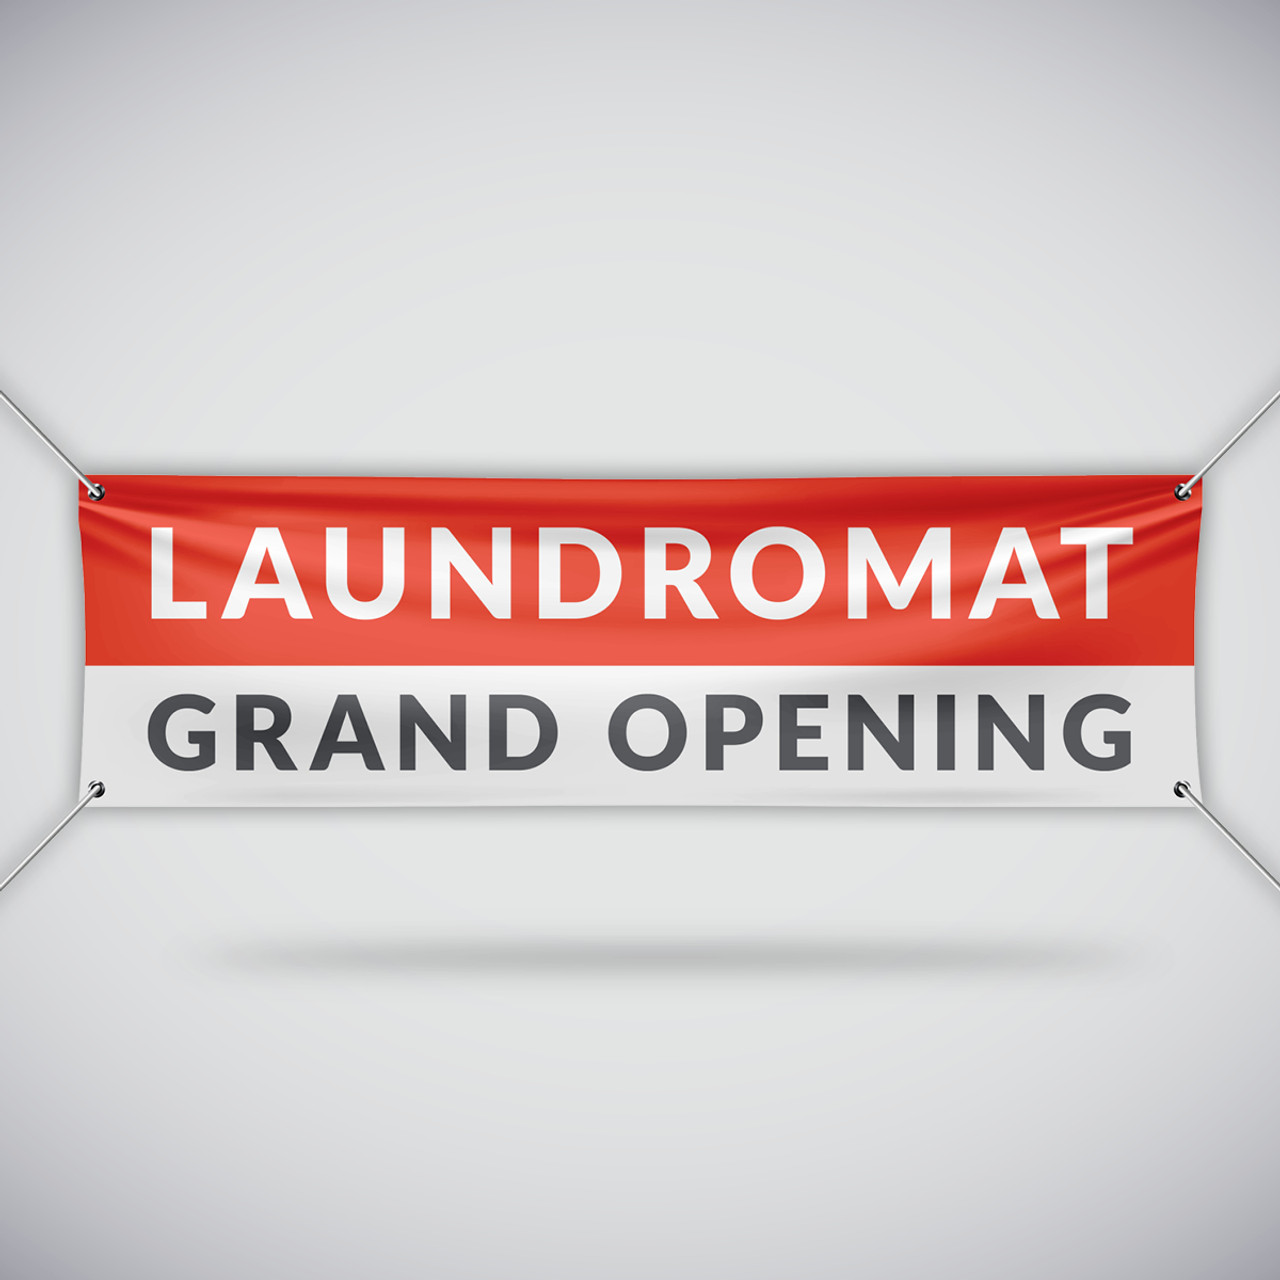 Laundromat Grand Opening Banner - Red